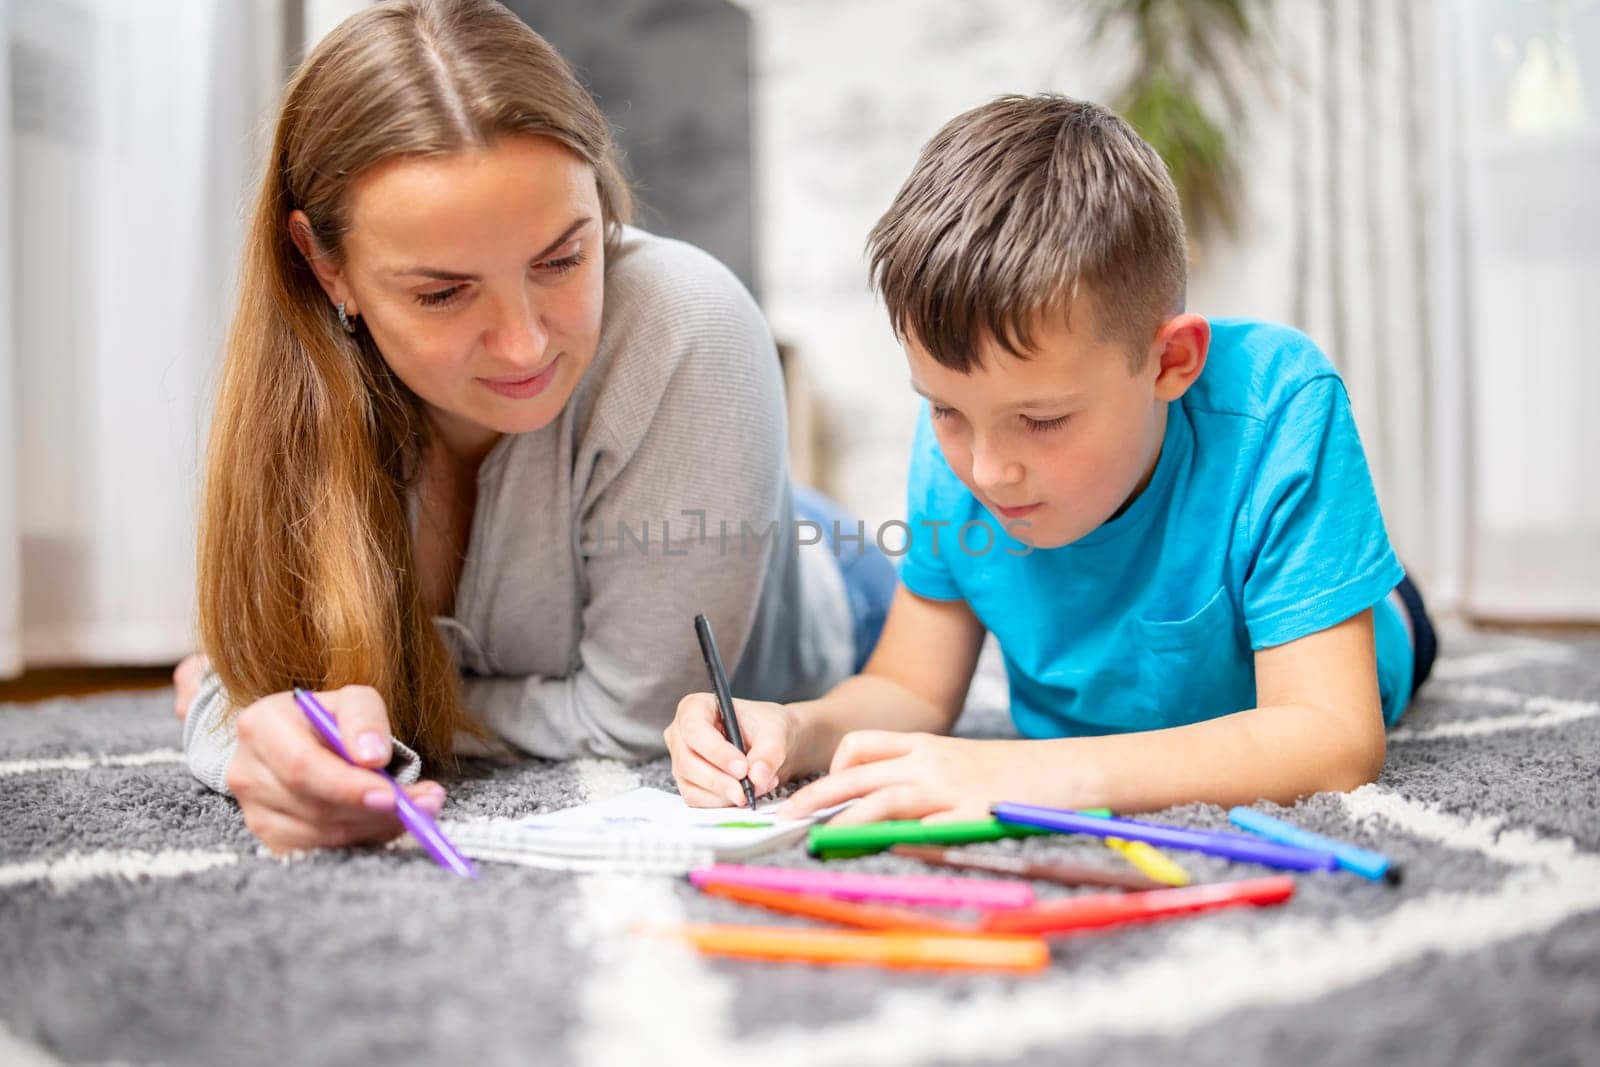 Happy family playing together at home on floor. Mother and her son painting together